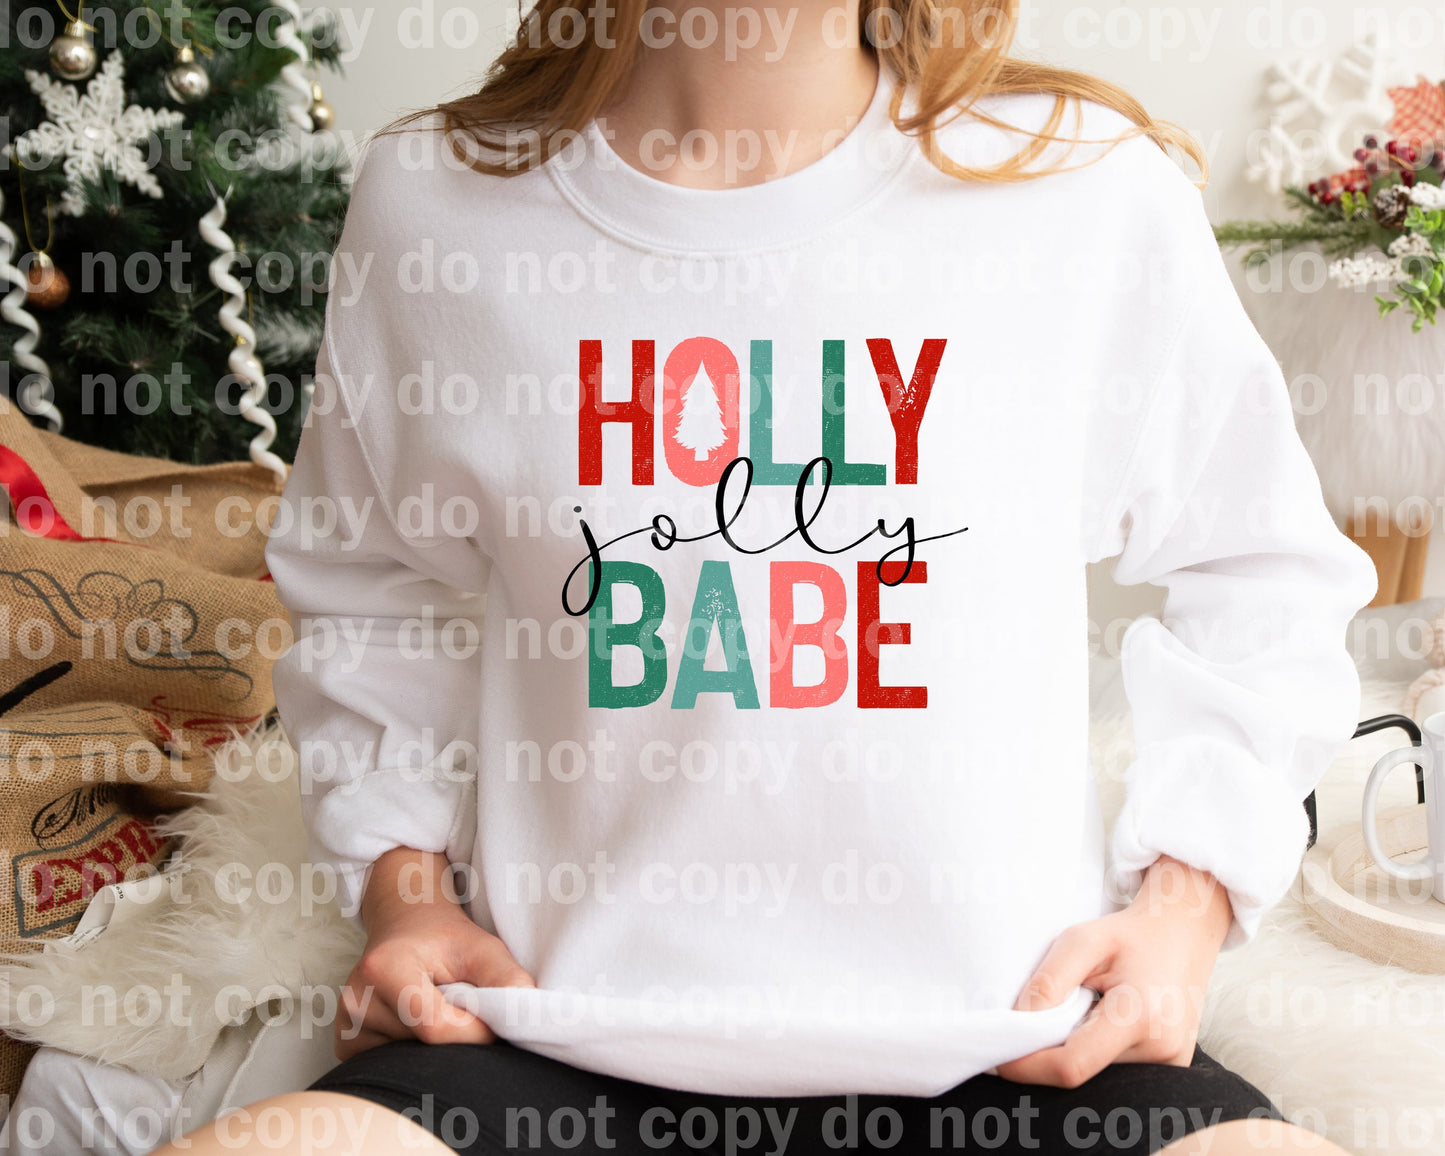 Holly Jolly Babe Distressed Dream Print or Sublimation Print